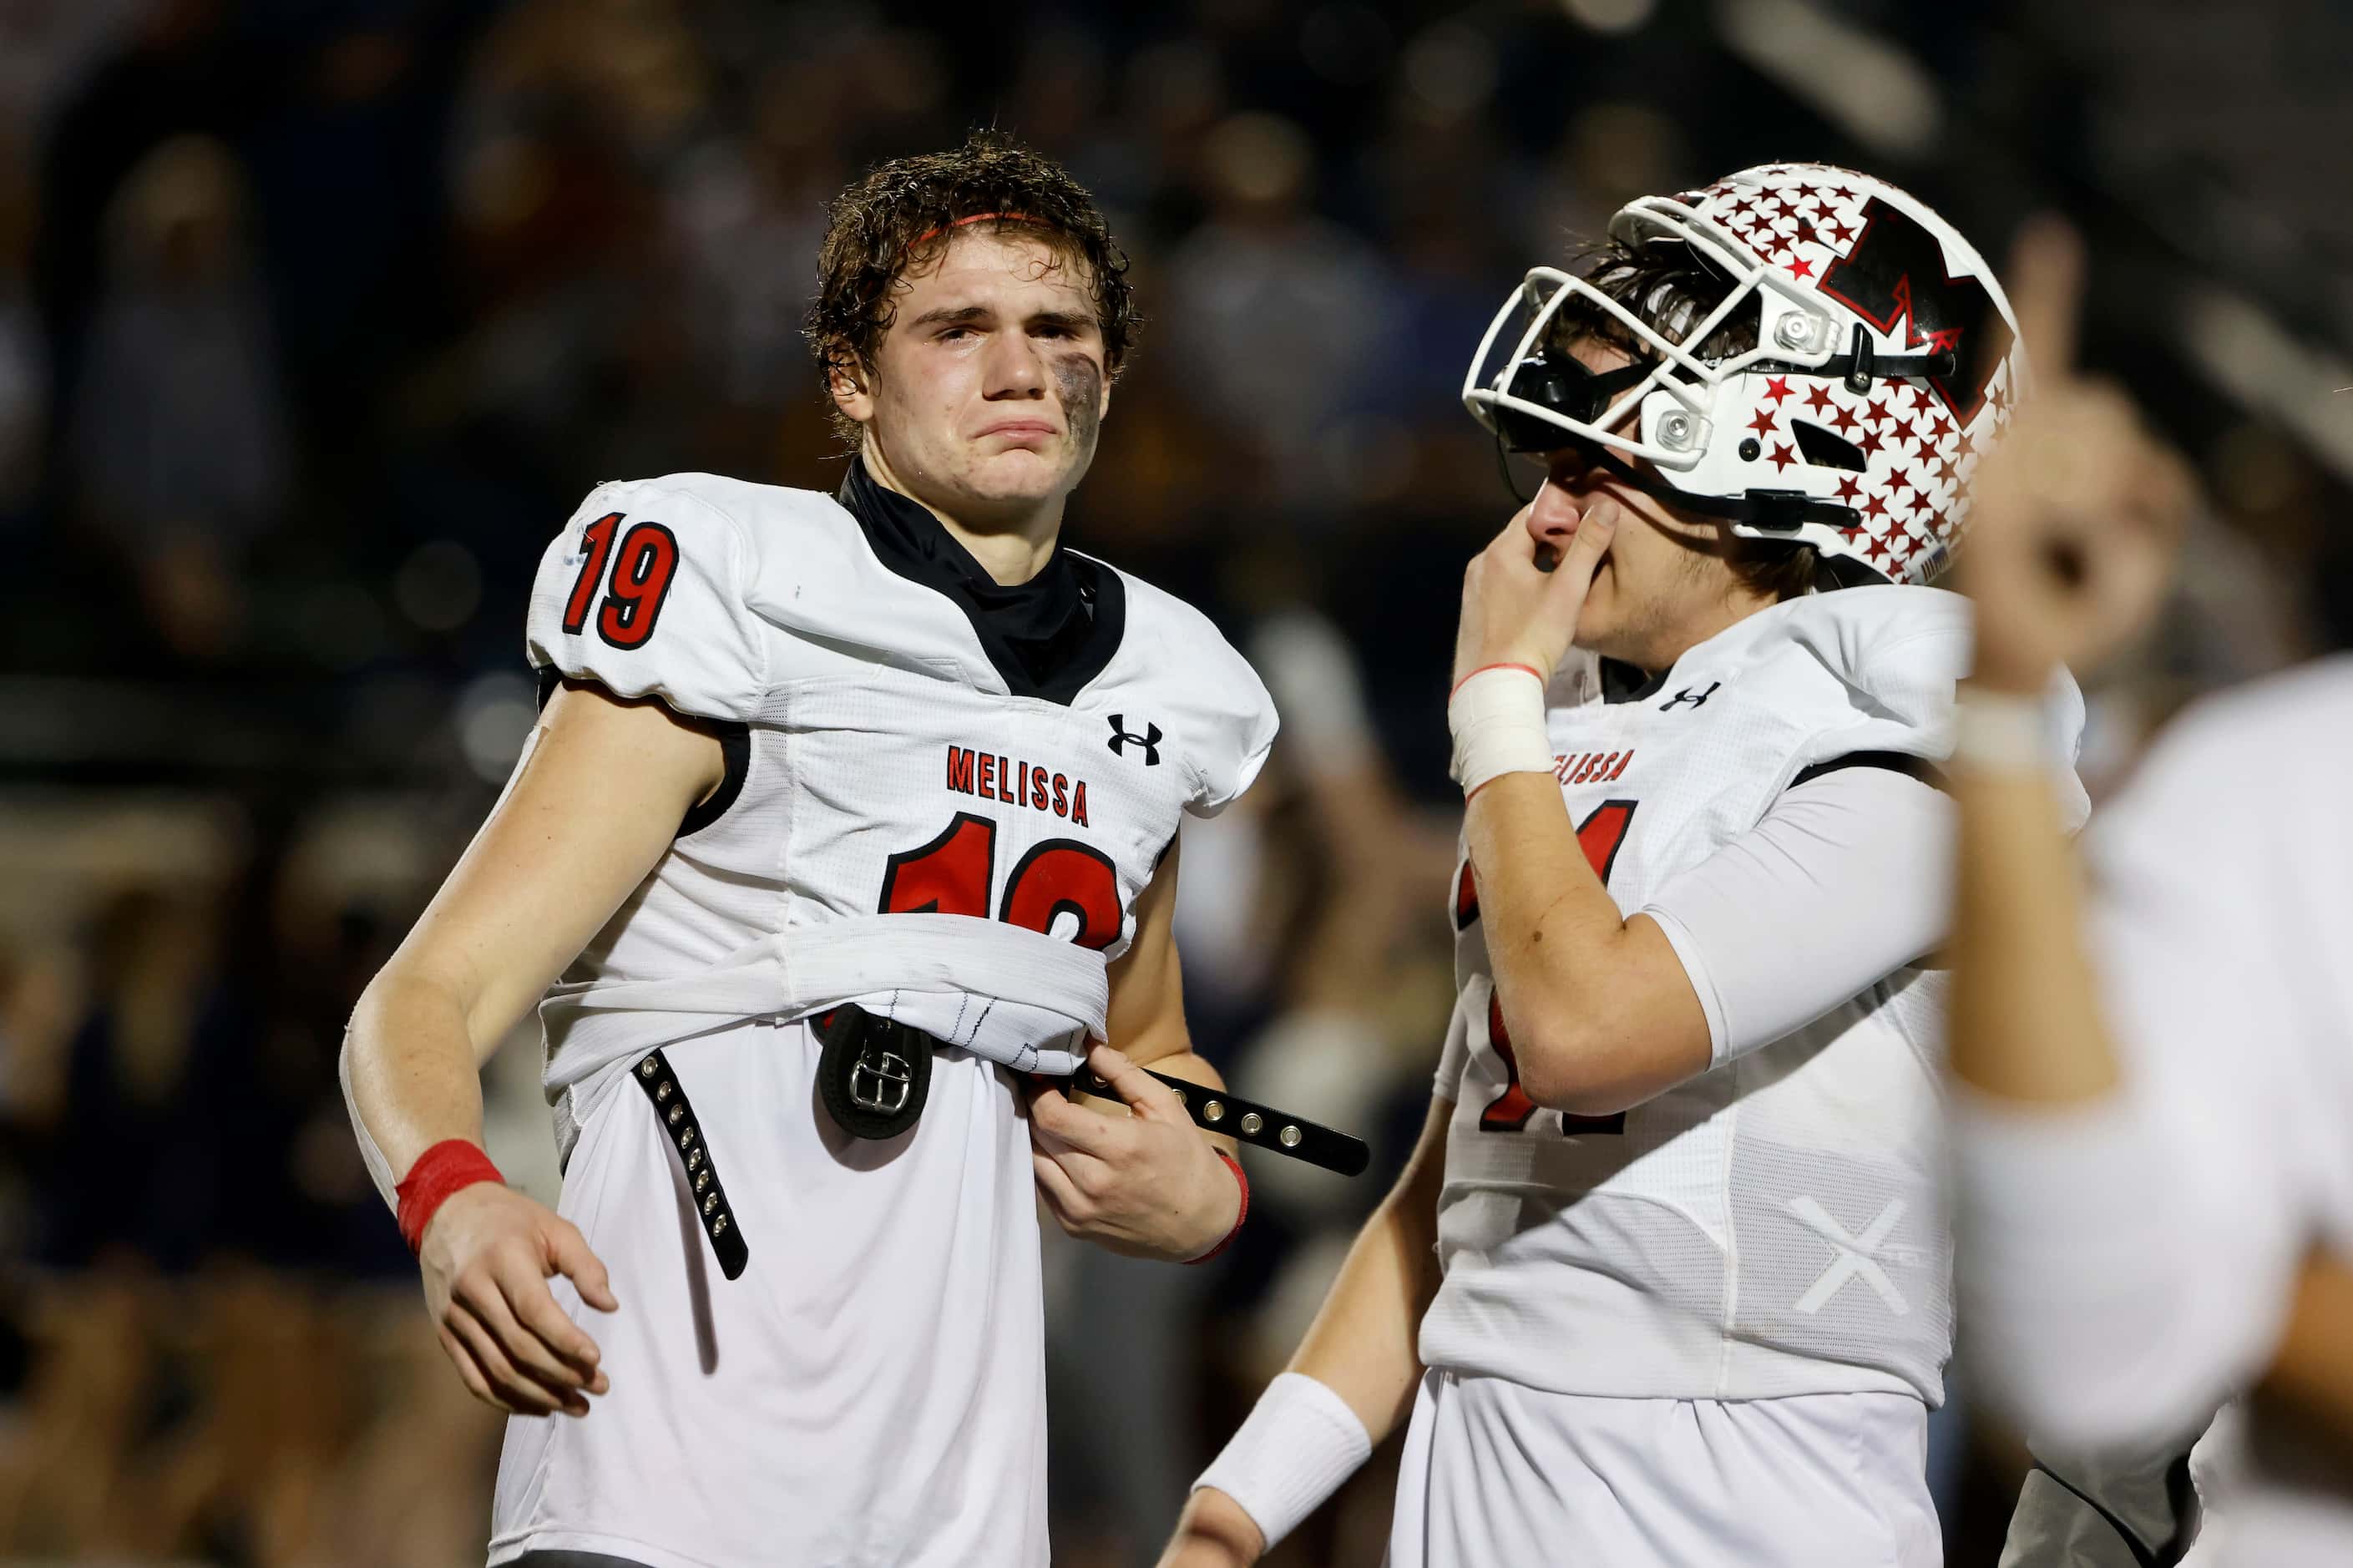 Melissa receiver Matthew Sanford and quarterback Sam Fennegan, right, react after losing to...